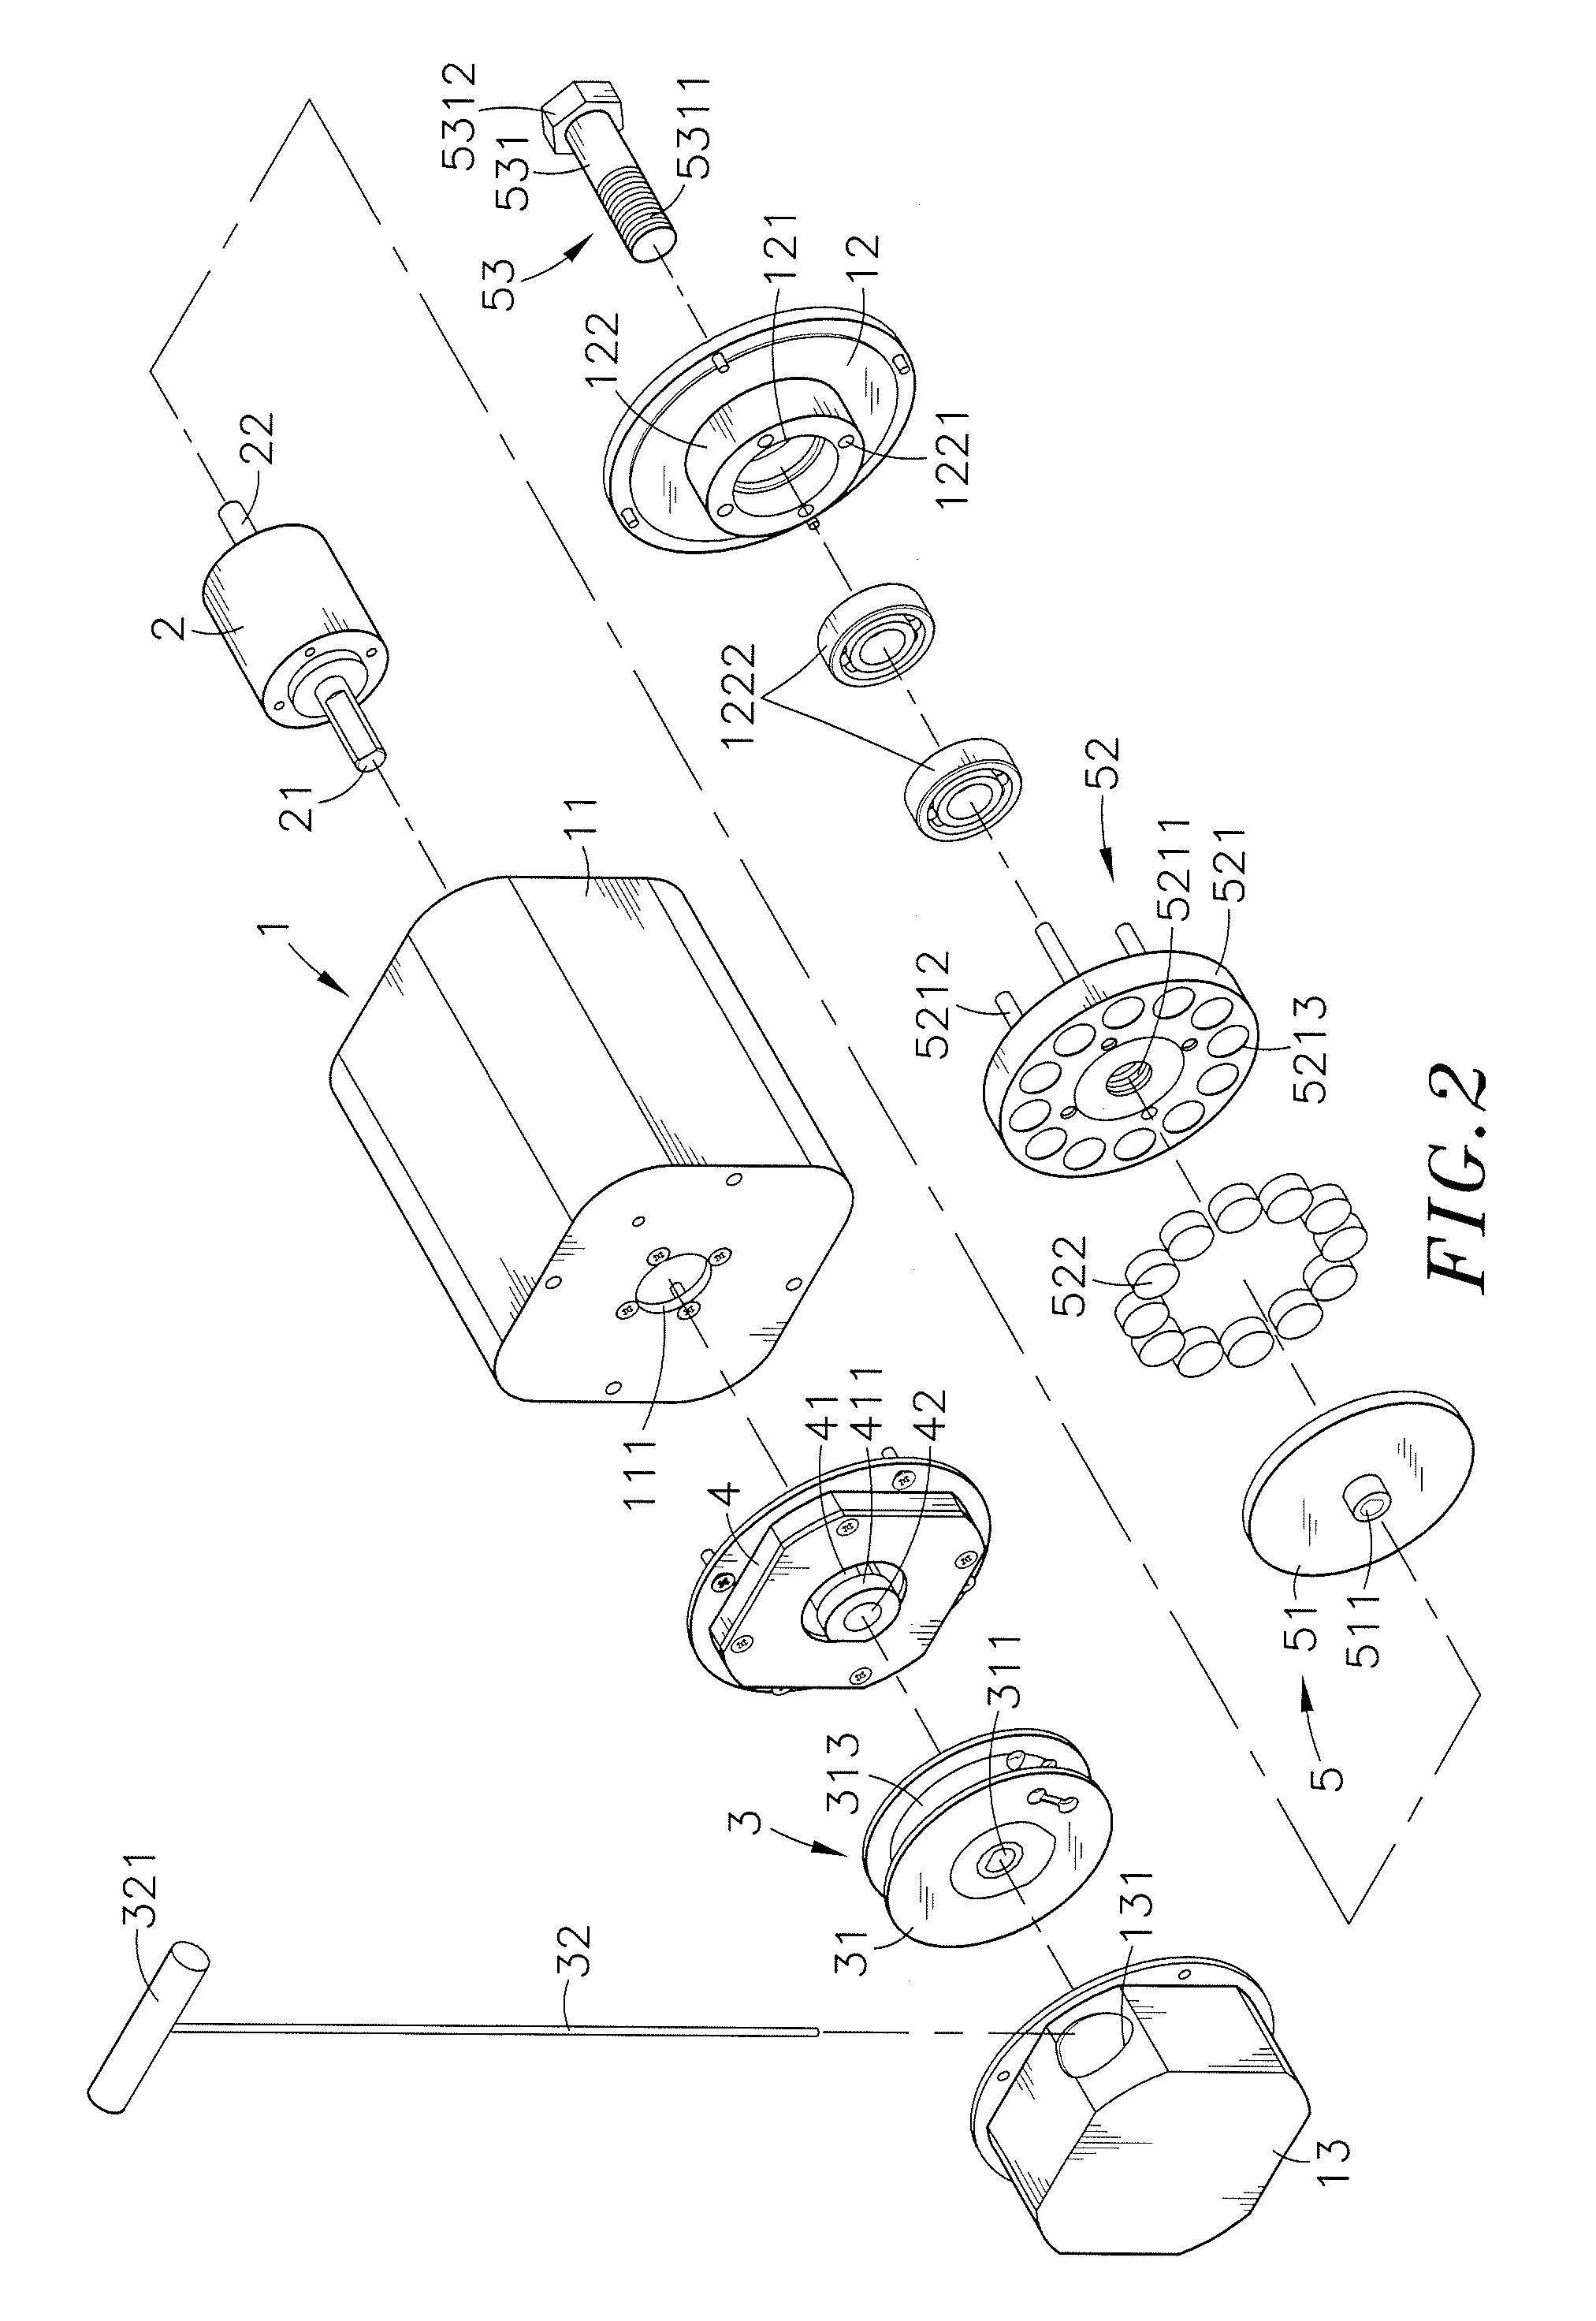 Damping device